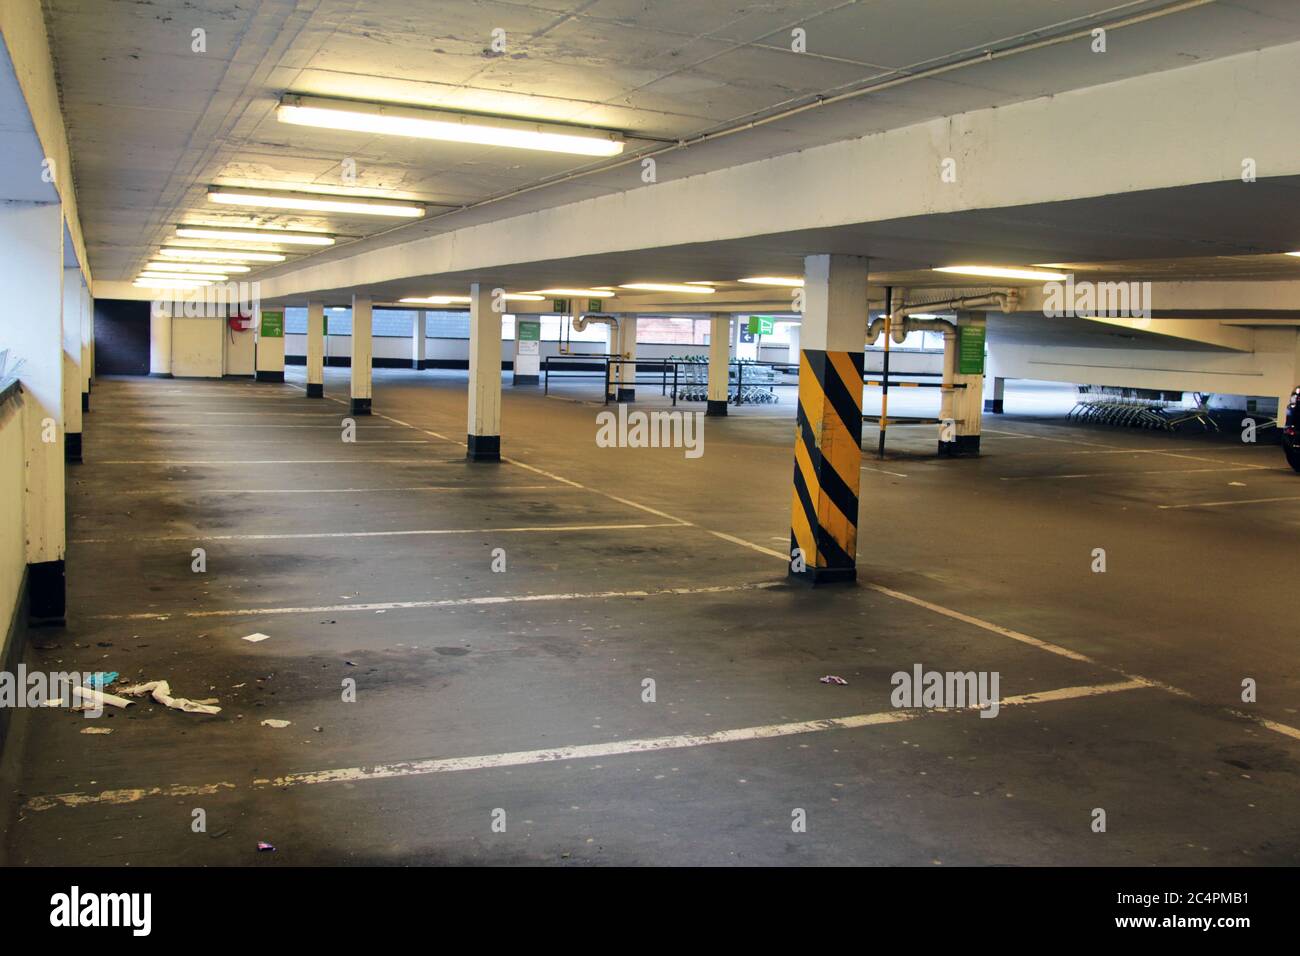 This is the car park above the Waitrose supermarket on Byres Road in Glasgow. Now totally empty as the coronavirus holds the UK in it's grip and a state of lockdown and stay at home is imposed on the country for now. May 2020. ALAN WYLIE/ALAMY© Stock Photo